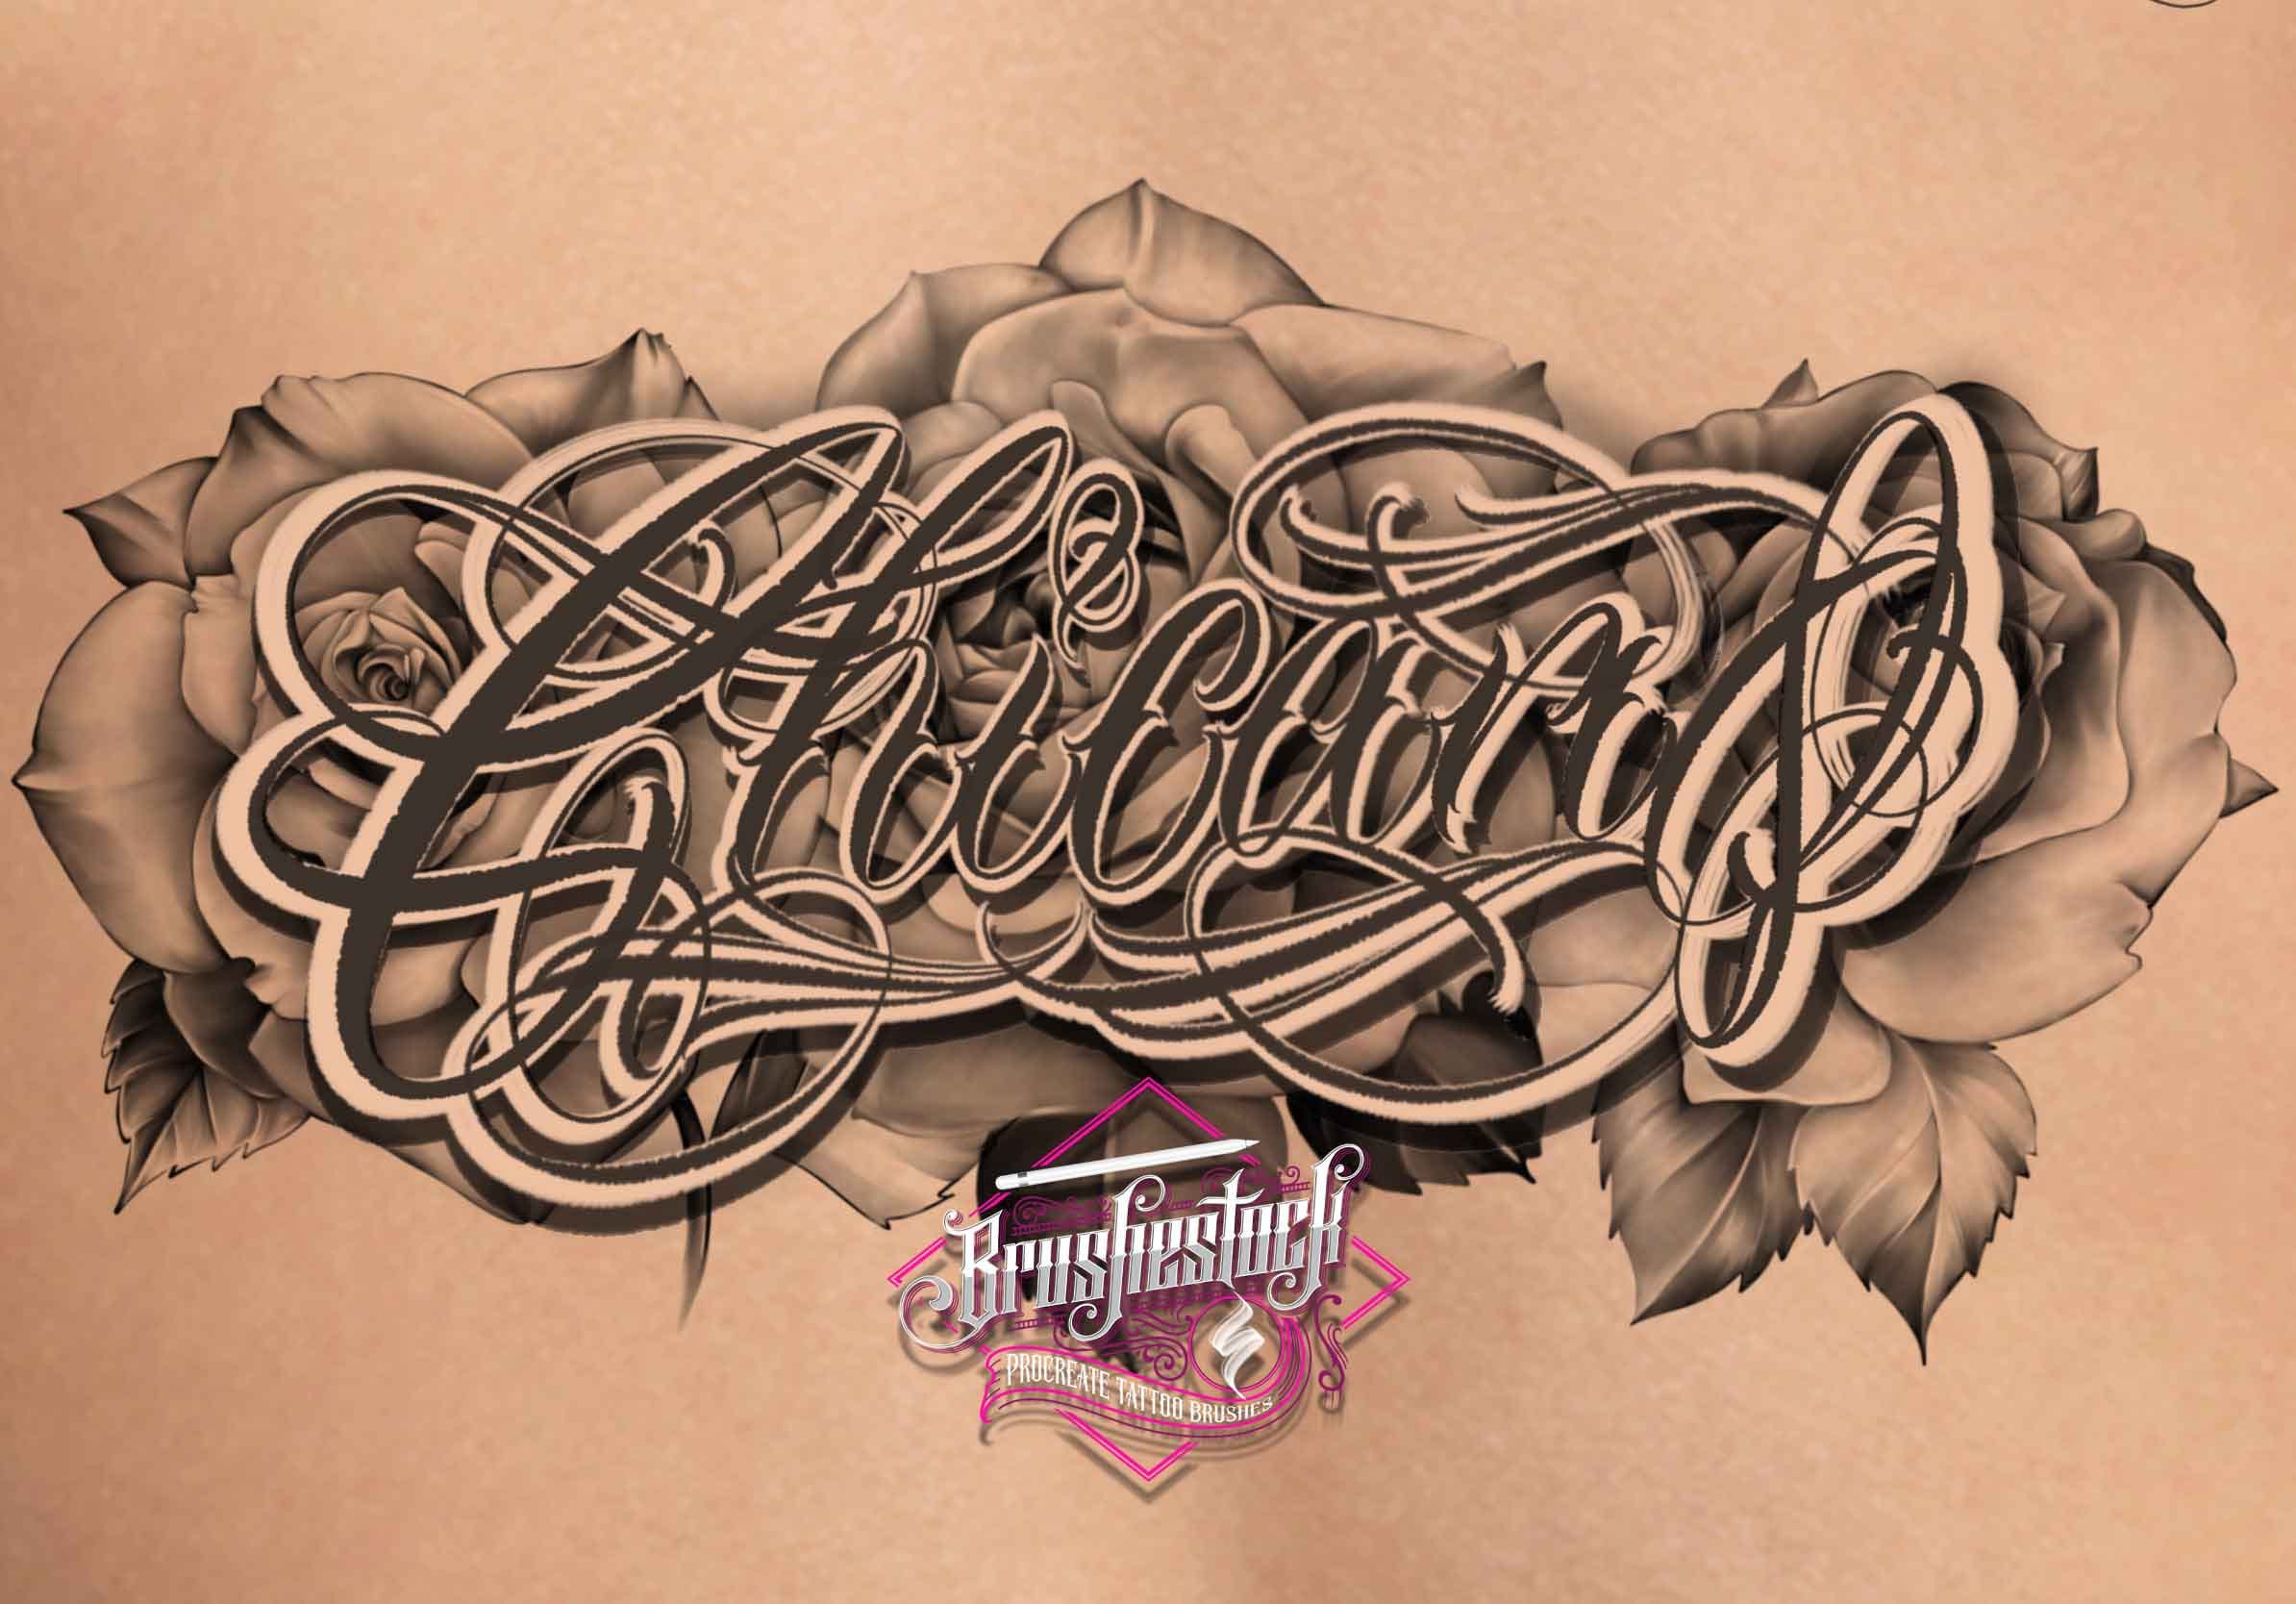 634 Chicano Lettering Tattoo Brushes Pack Volume 2 for Procreate  application on iPad and iPad pro – Brushestock